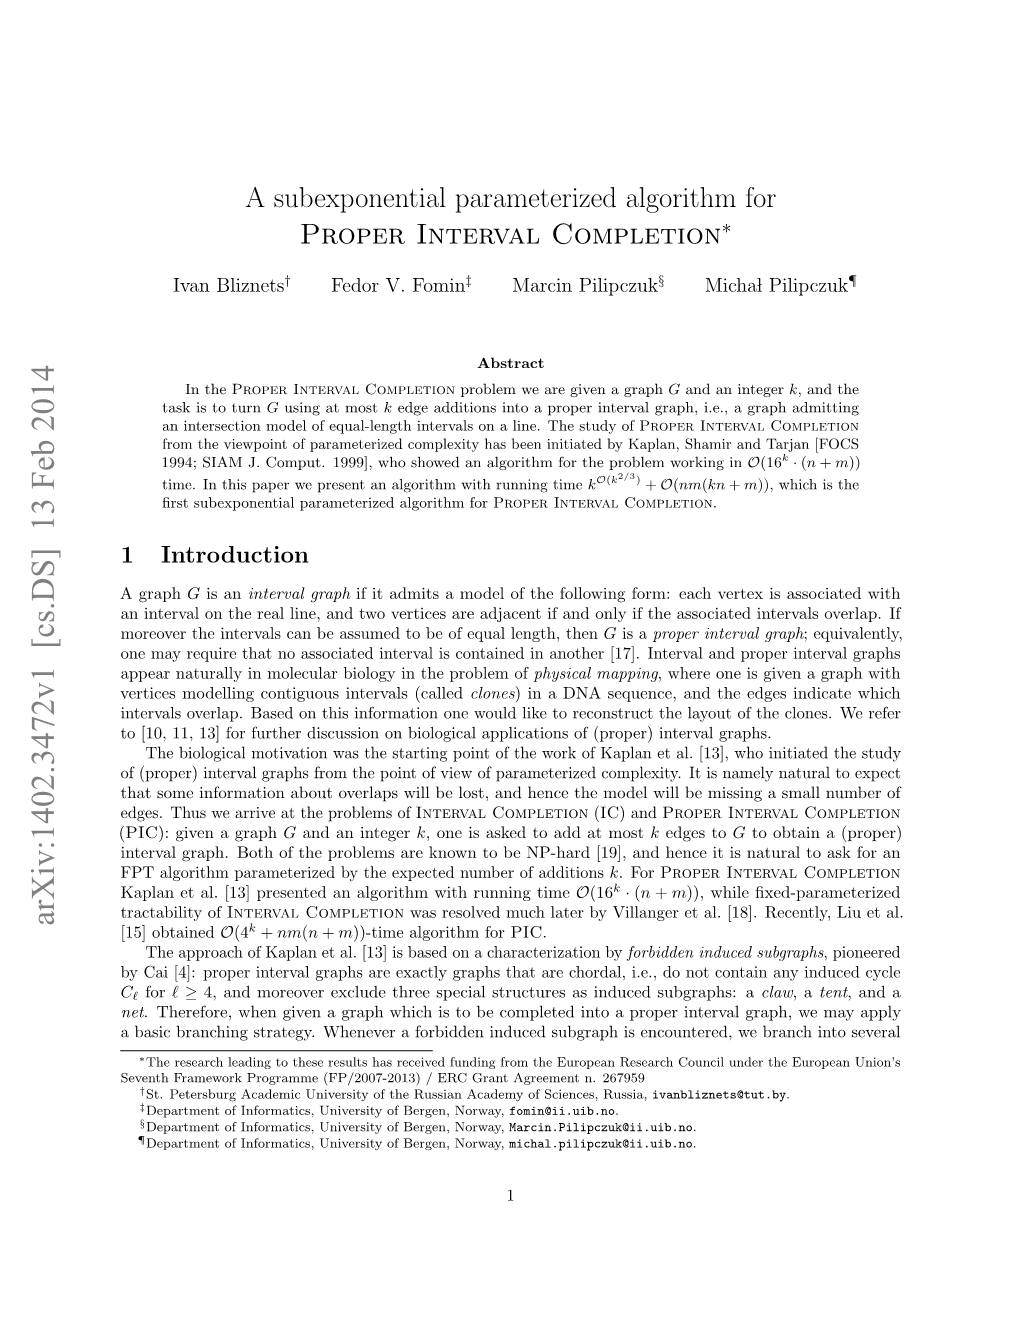 A Subexponential Parameterized Algorithm for Proper Interval Completion∗